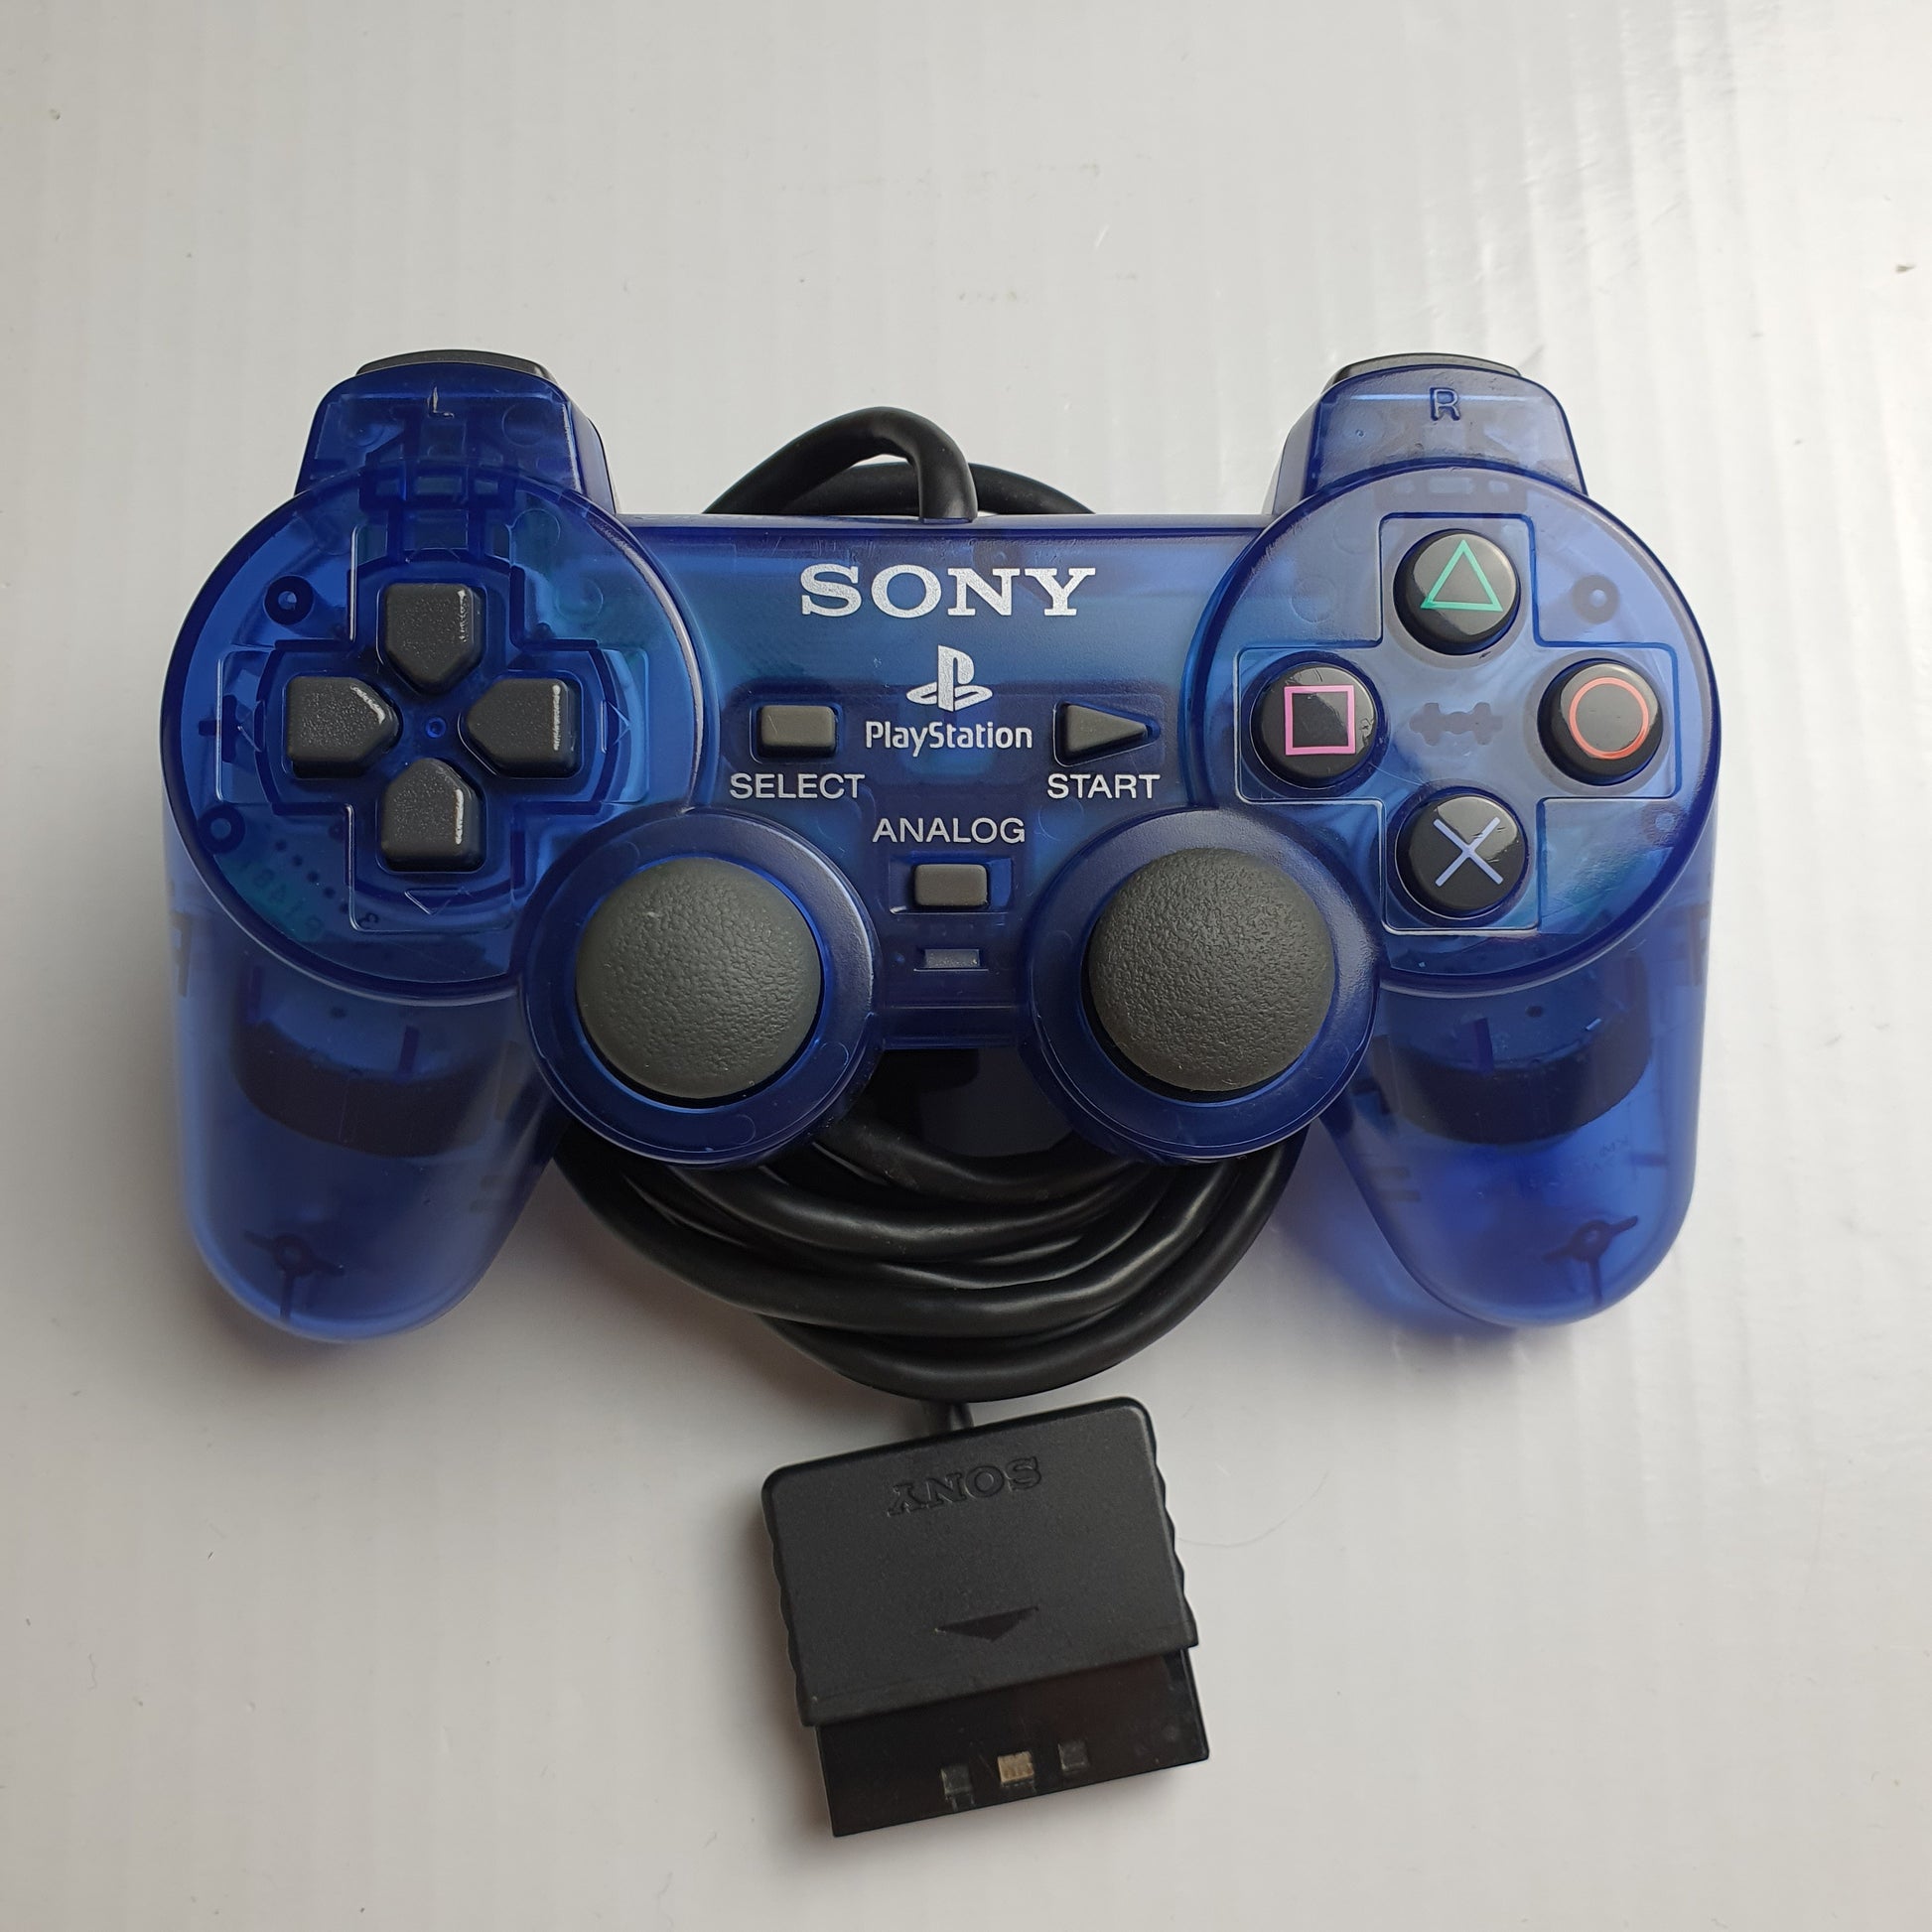  Sony Playstation 2 Dualshock 2 Analog Wired Controller